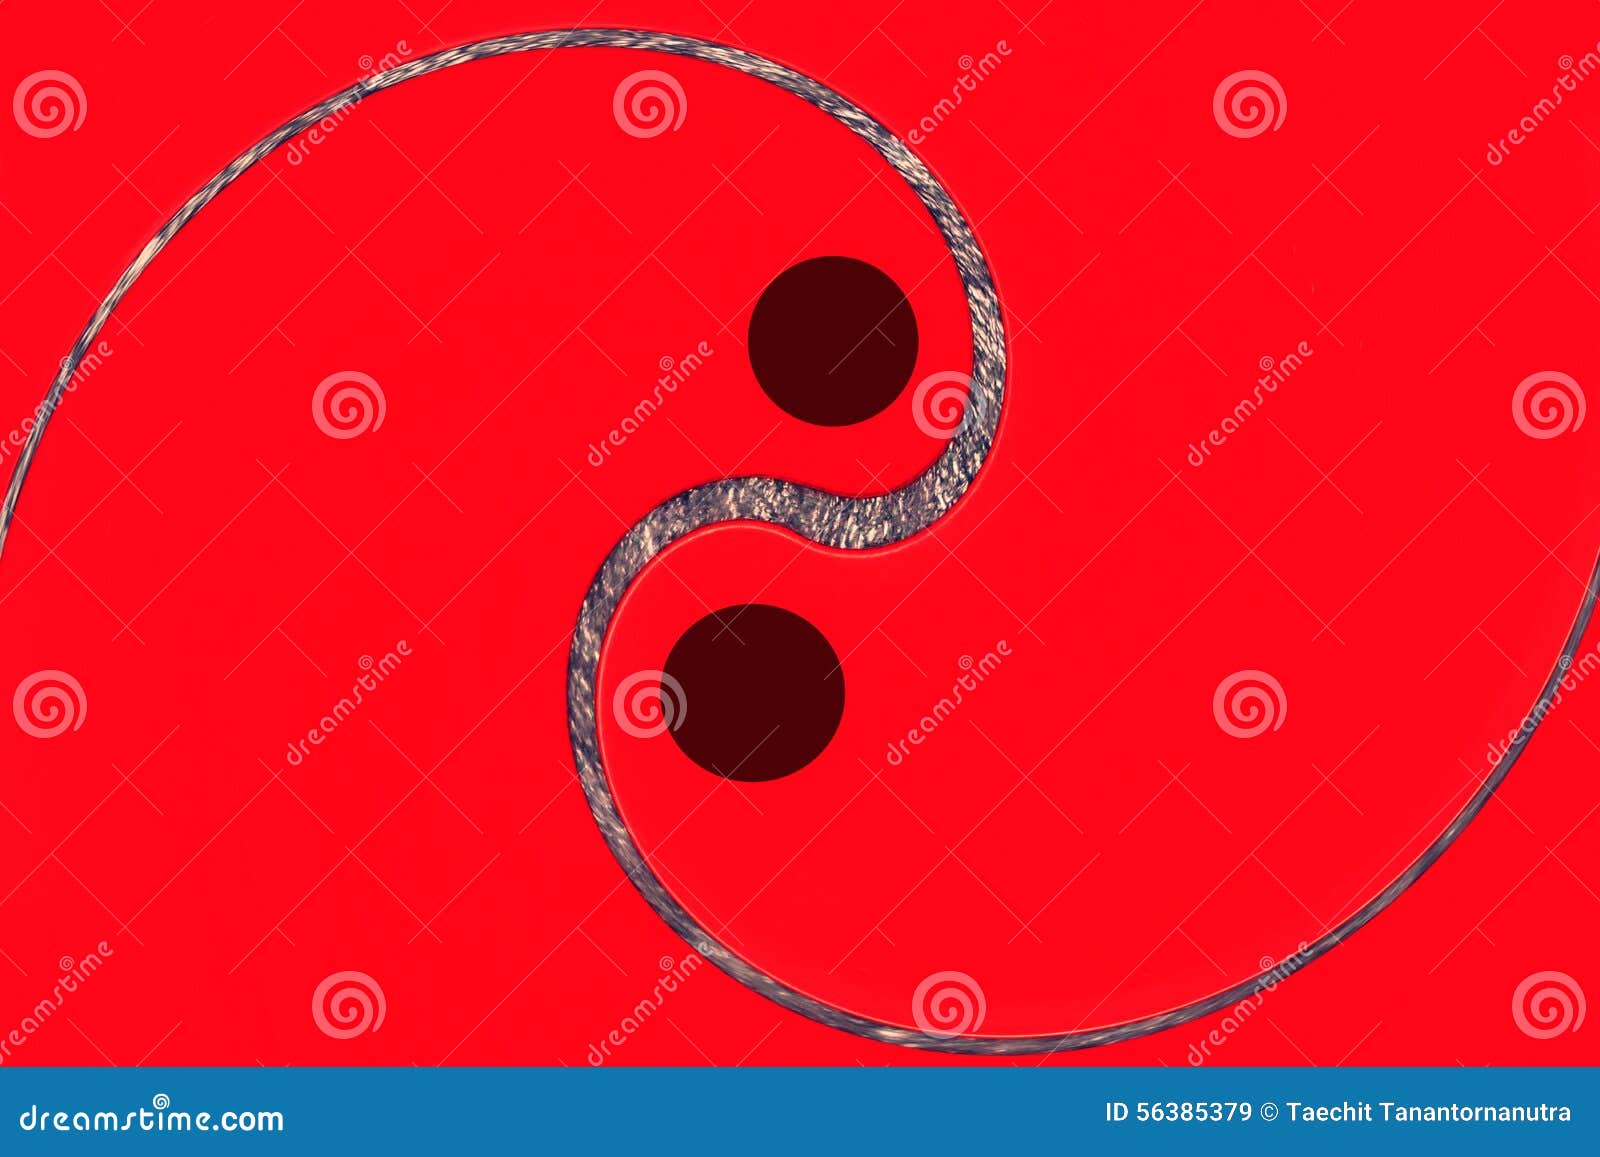 Red Yin Yang sign stock image. Image of design, religious - 56385379